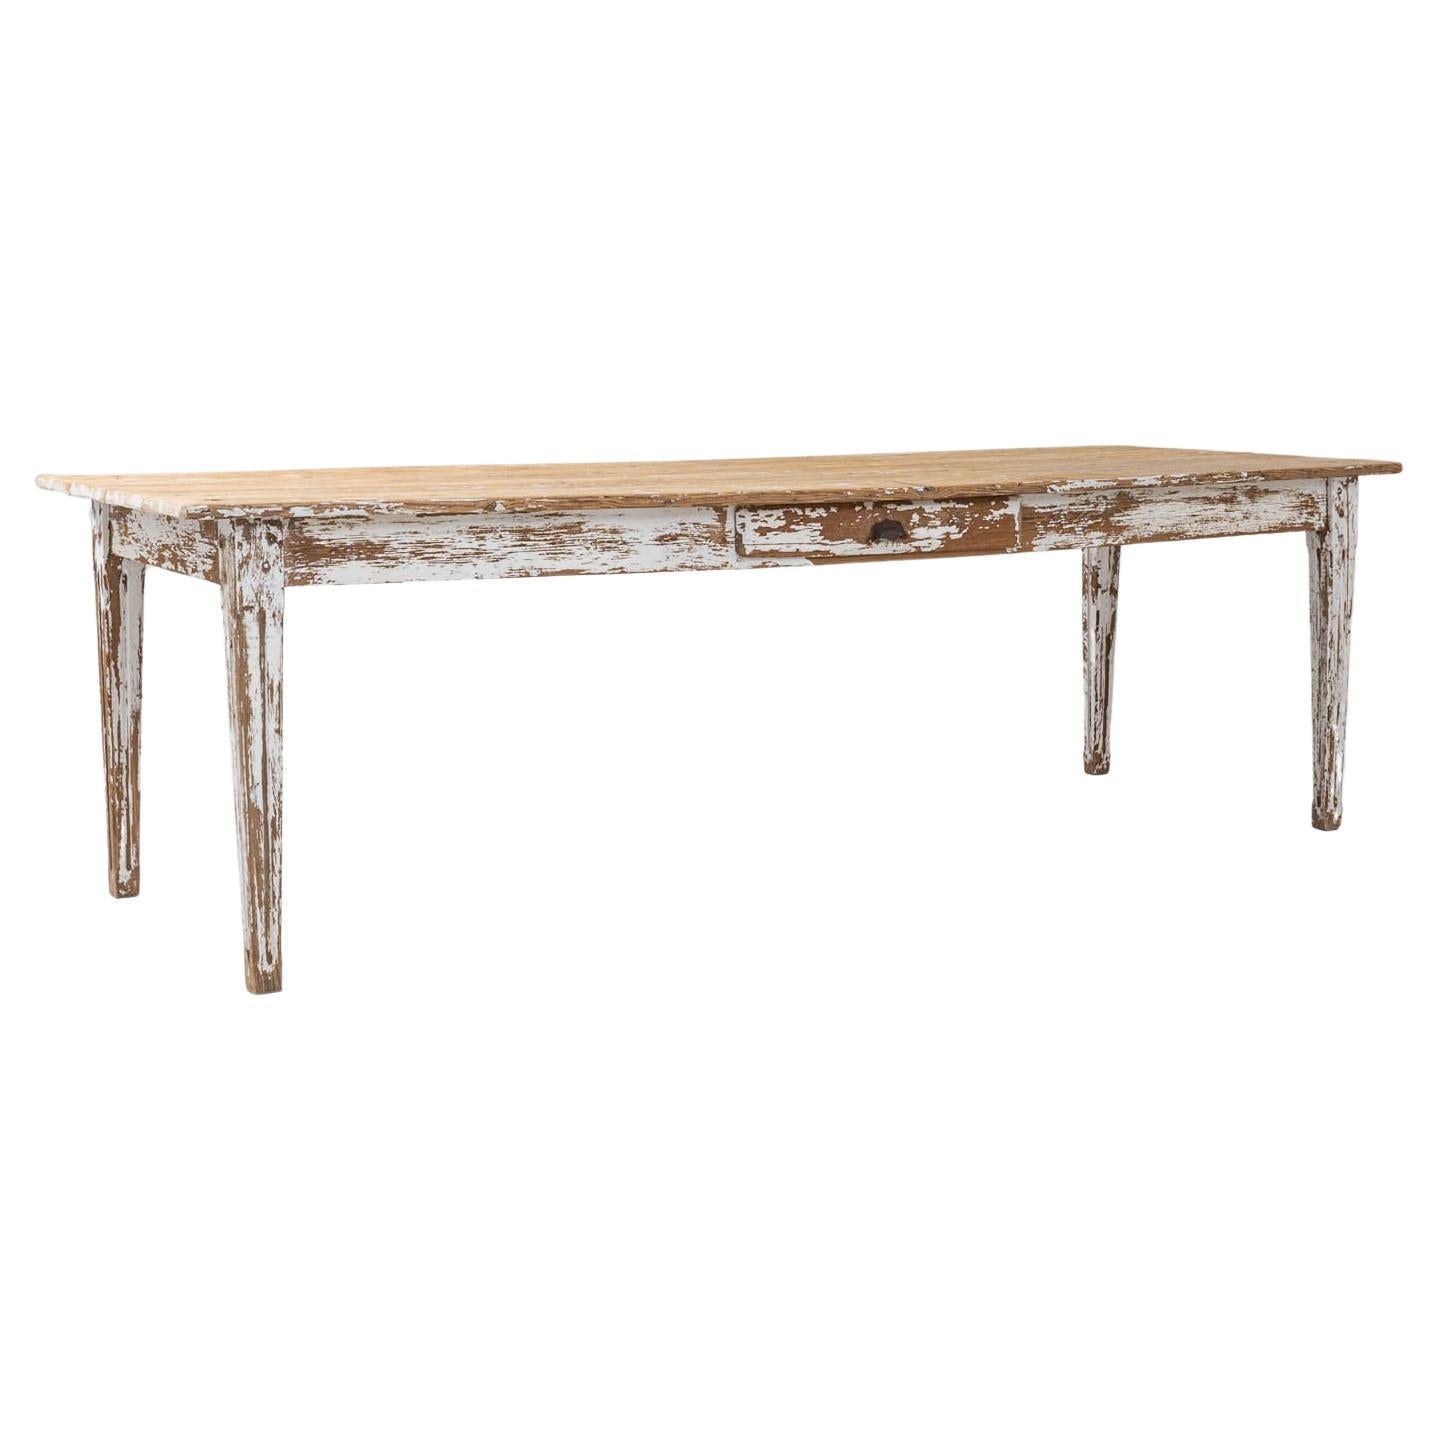 Early 20th Century French Country Patinated Wooden Dining Table For Sale